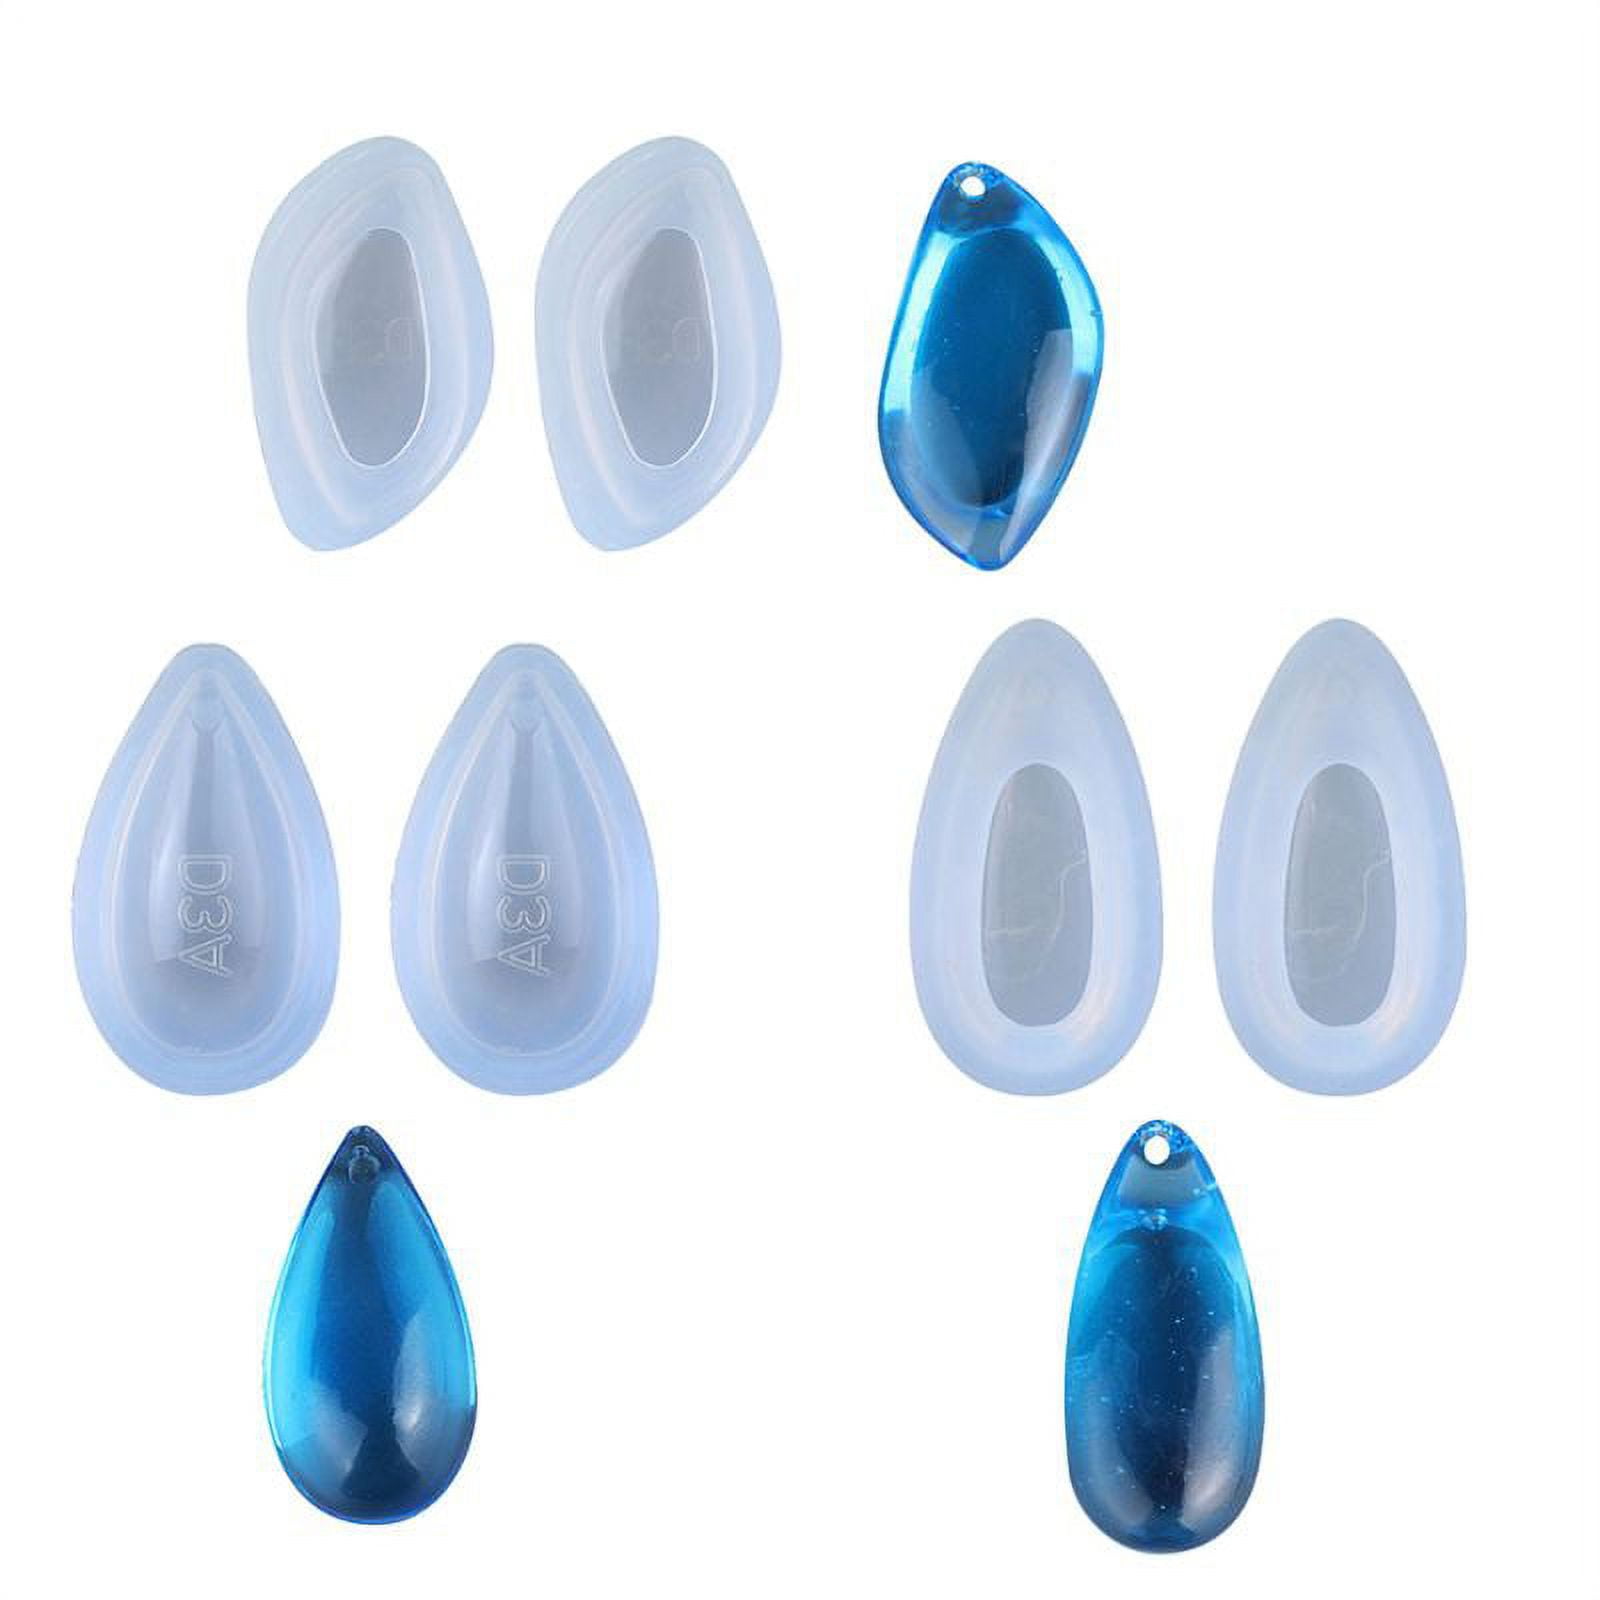 2pcs Resin Epoxy Earring Molds, EEEkit Silicone Casting Molds for Jewelry Resin Craft Casting, Leaf, Teardrop, Round, Heart Shaped, Snowflake Pendant